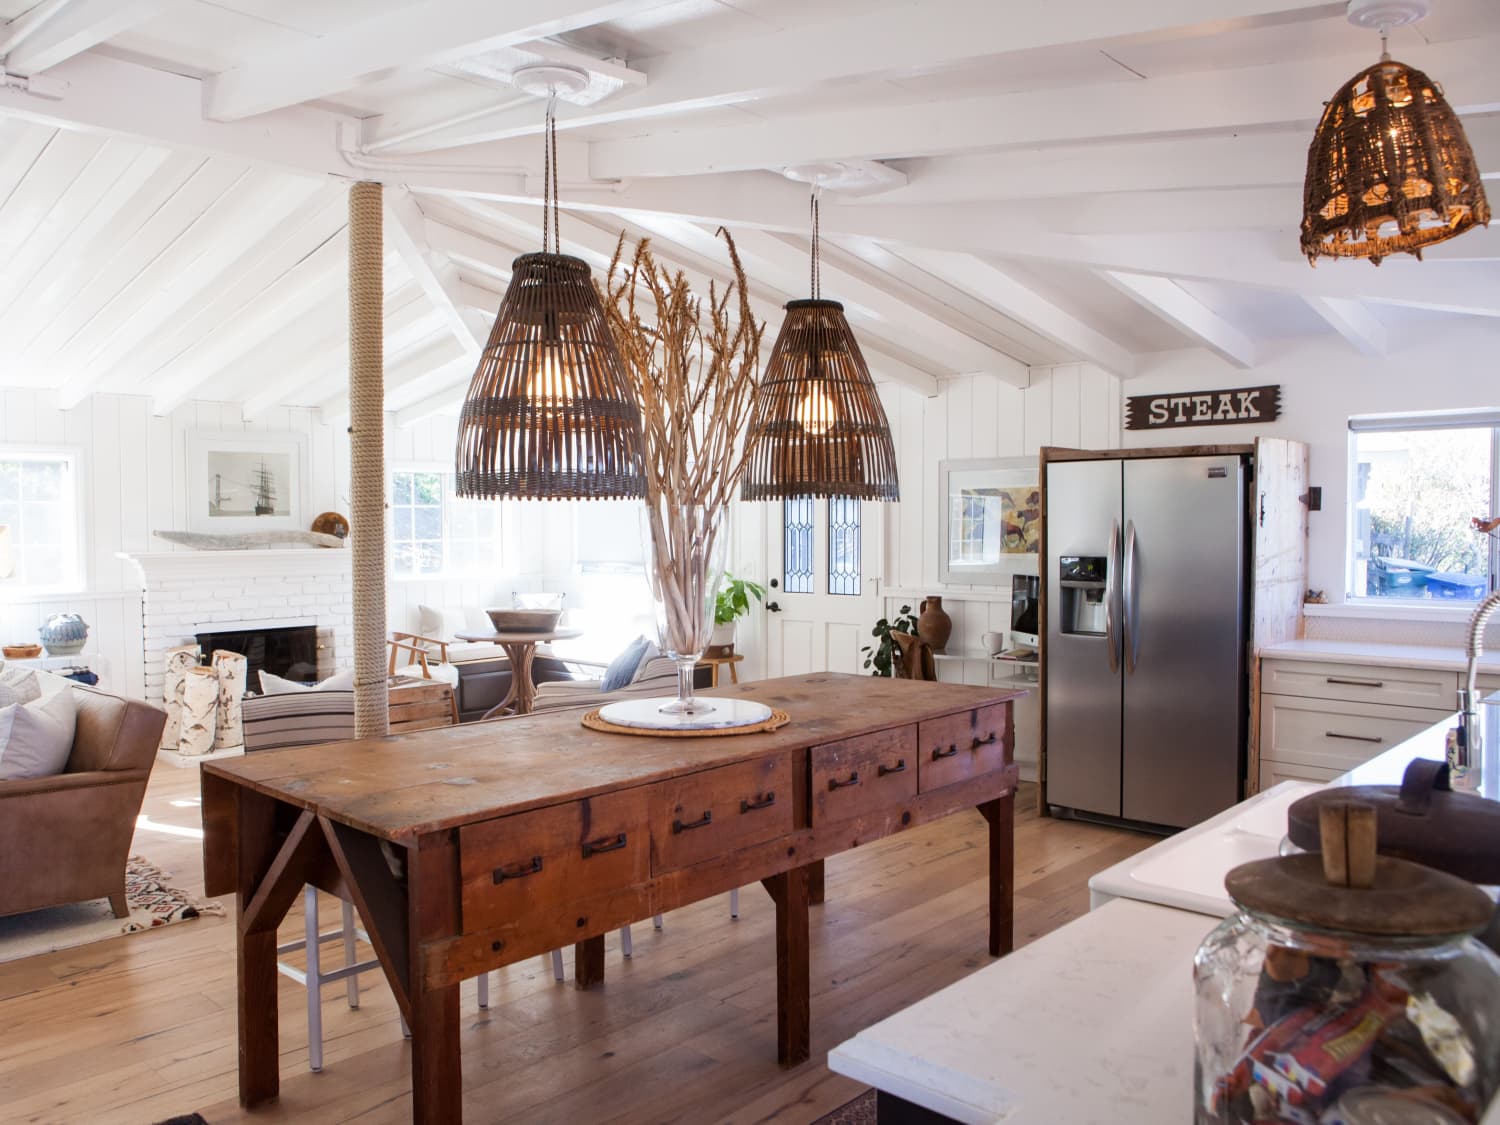 Farmhouse Country Kitchen {5 Take Away Tips} - The Inspired Room